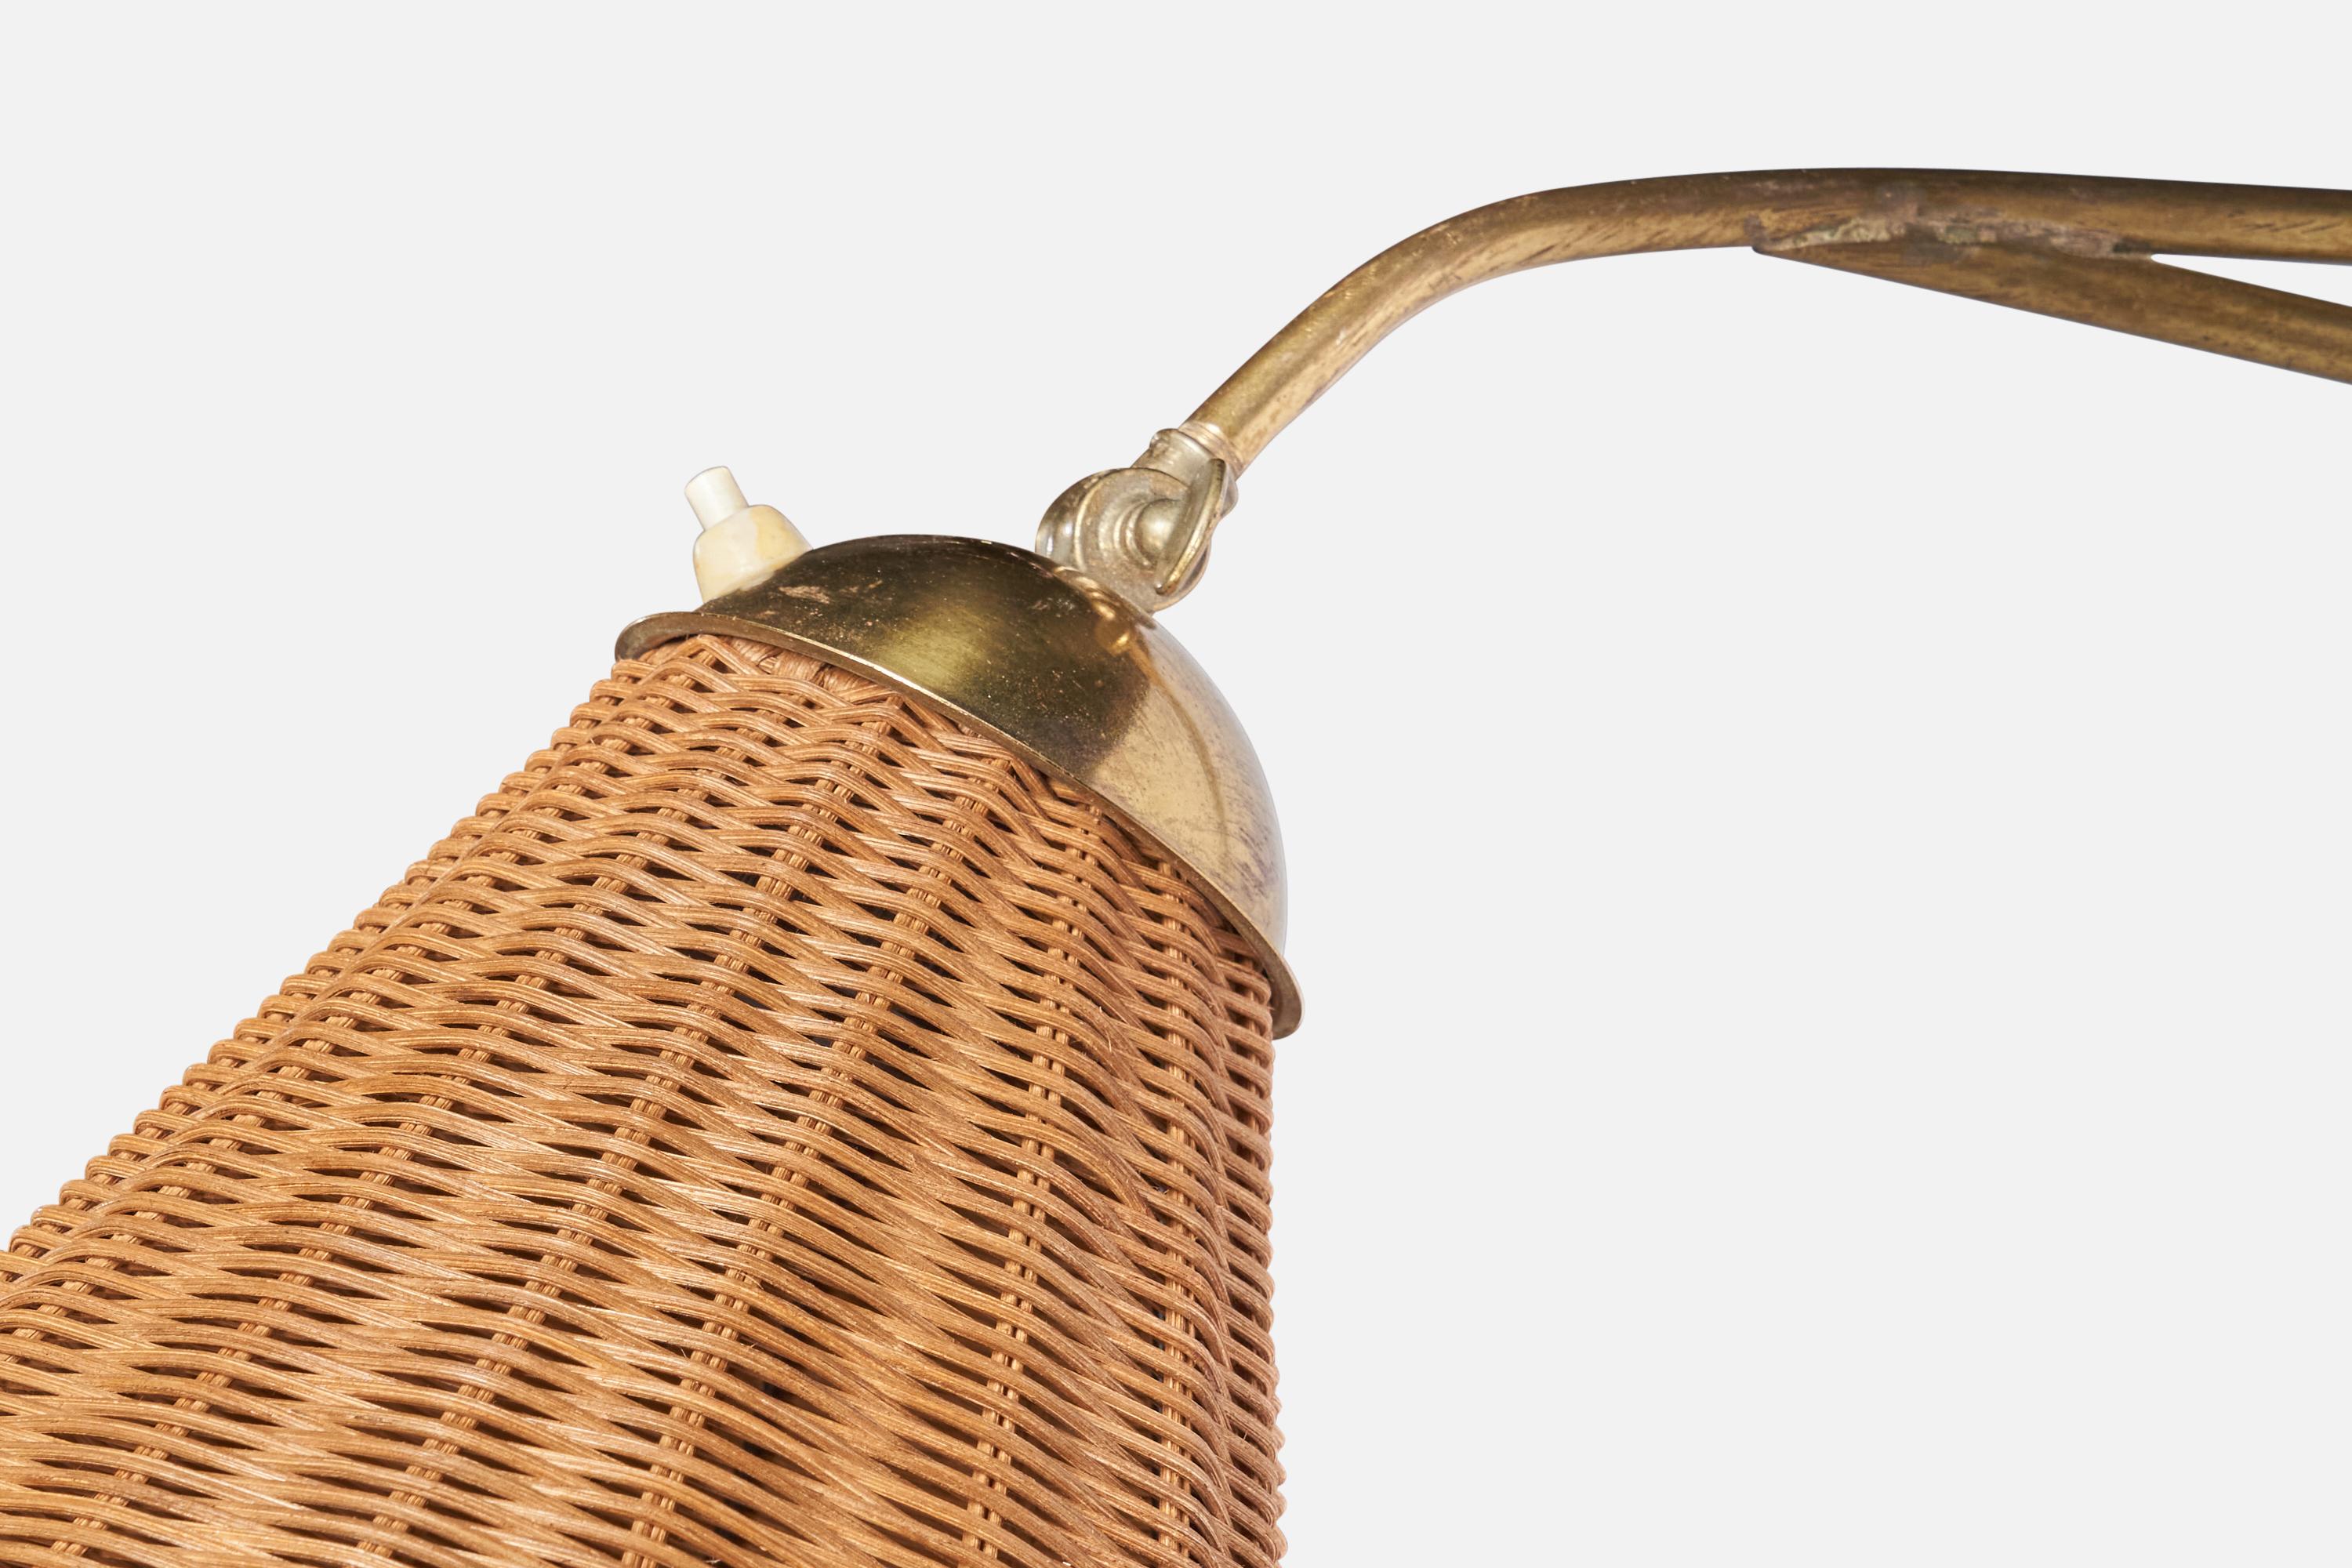 
An adjustable brass and rattan wall light designed and produced in Sweden, 1940s.
Overall Dimensions (inches): 11.65” H x 9.1” W x 35.5” D
Back Plate Dimensions (inches): 6.5” H, 1.2” W, 1.25 D
Bulb Specifications: E-26 Bulb
Number of Sockets: